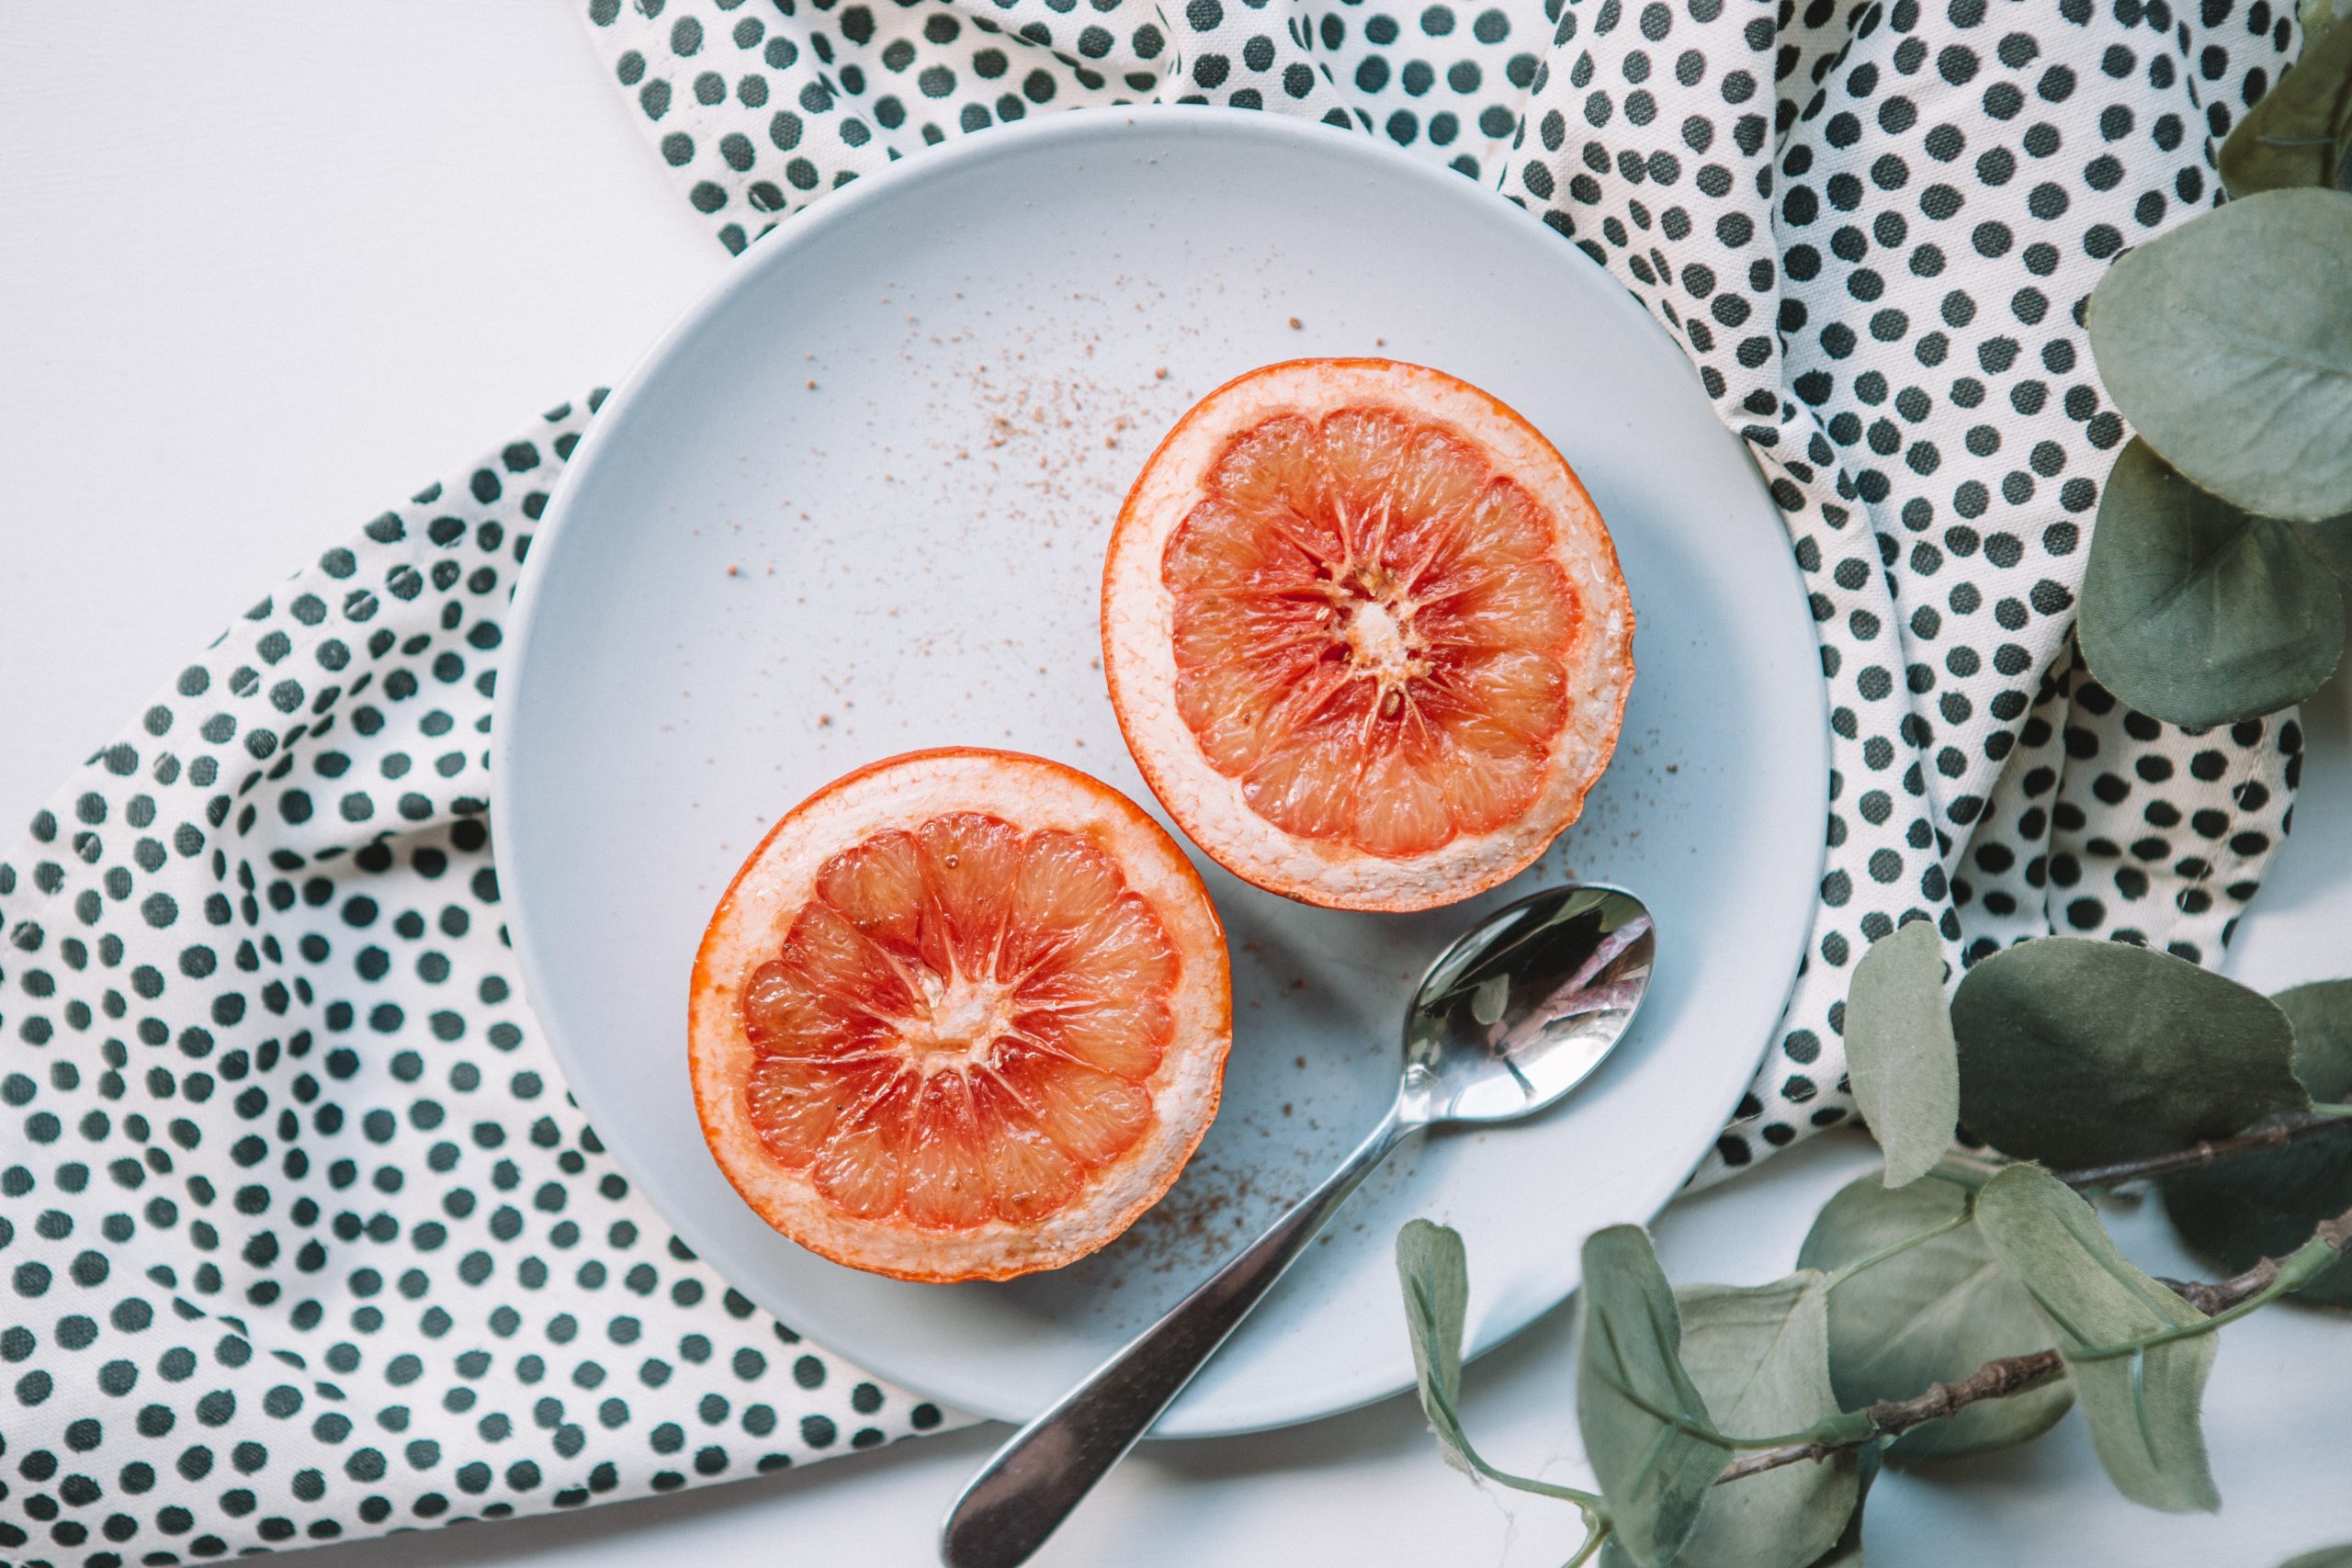 two halves of grapefruit on white plate with spoon - foods for fertility